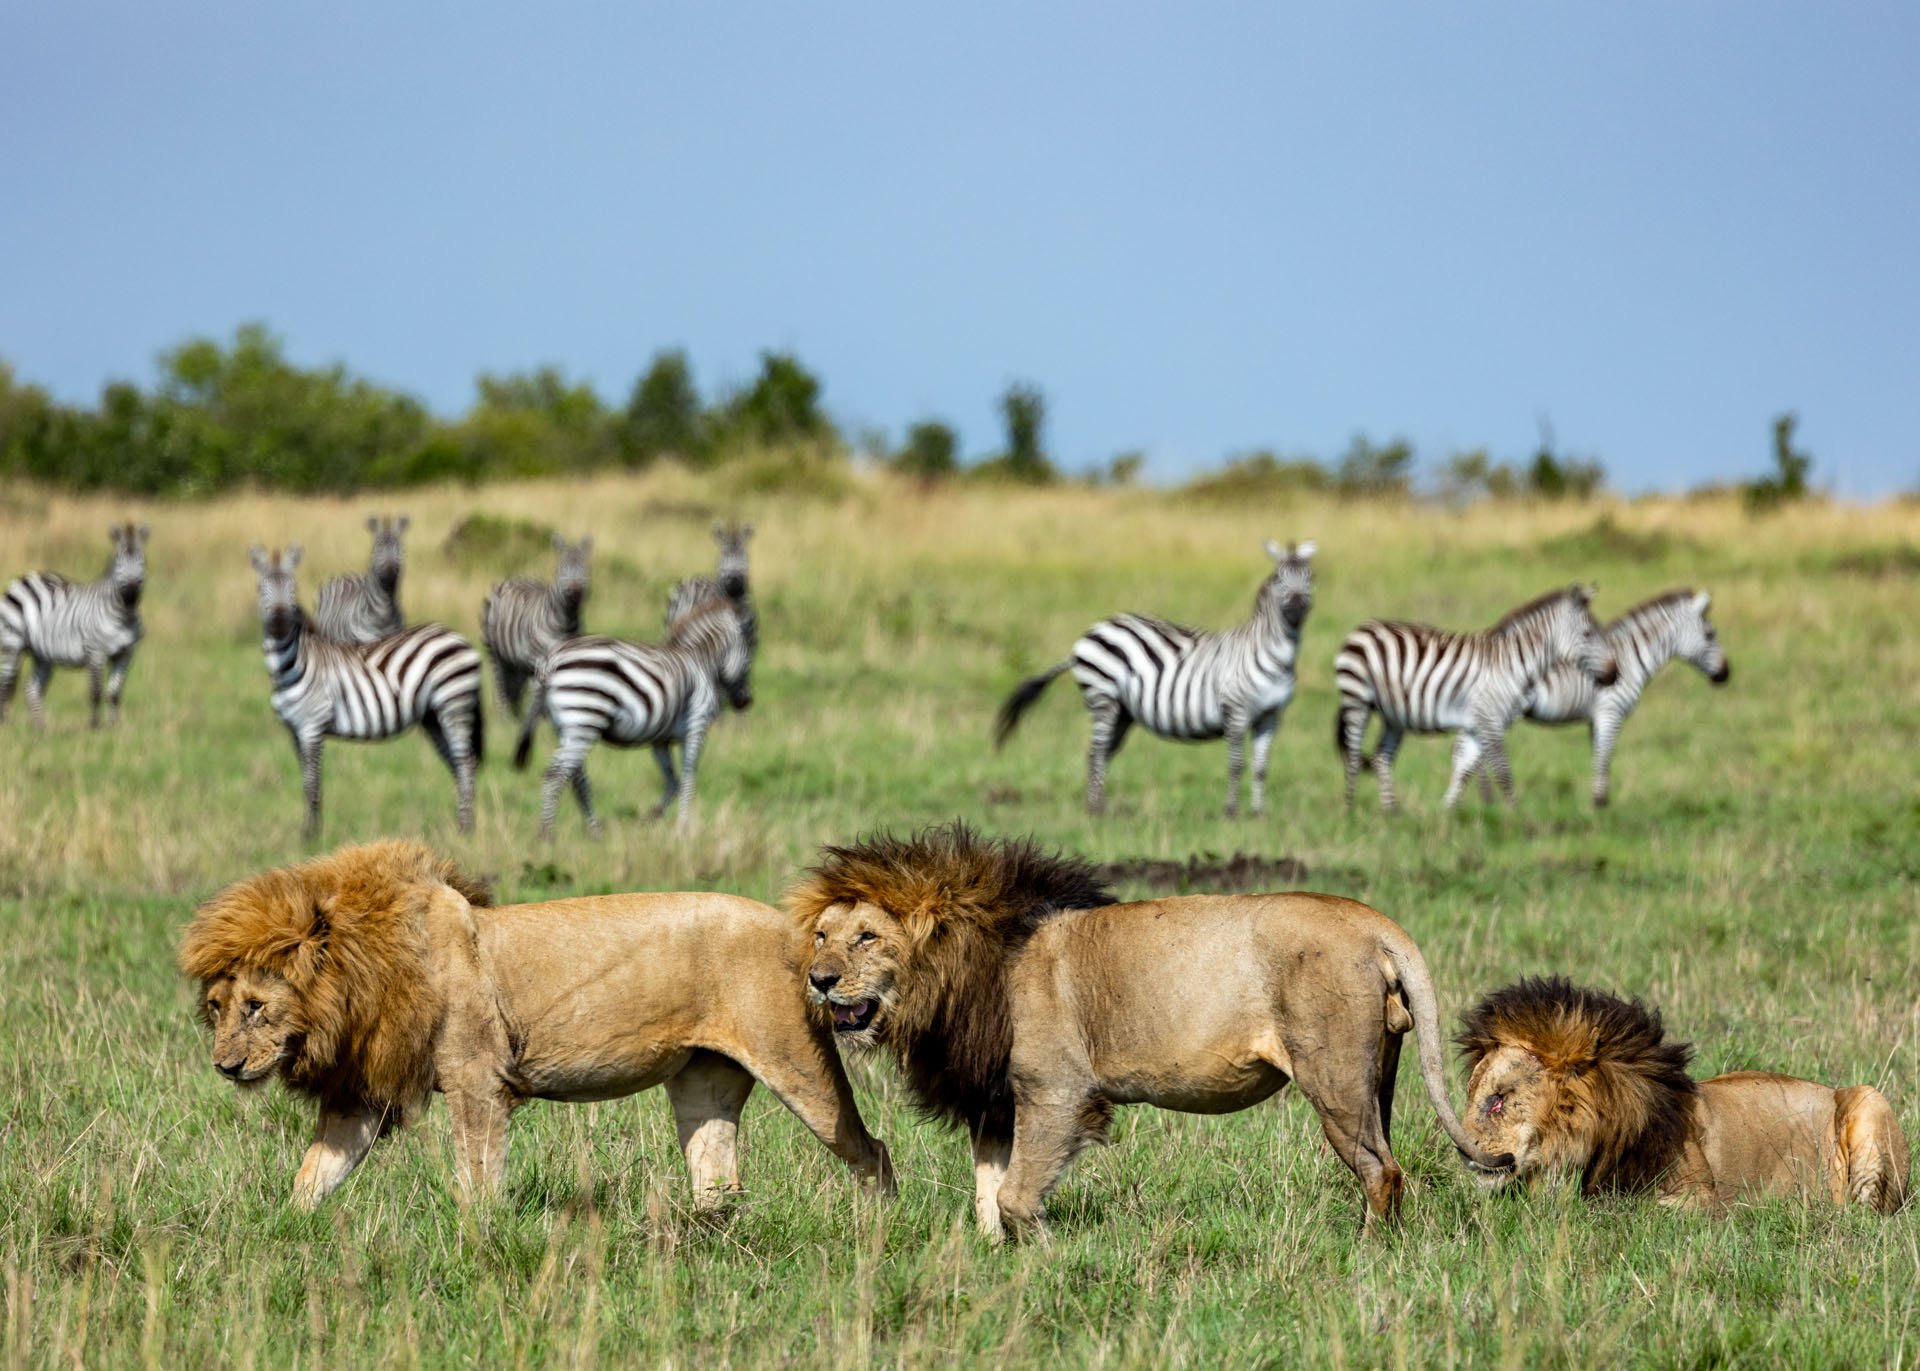 Three of the Inselberg males, with the best manes in the Mara